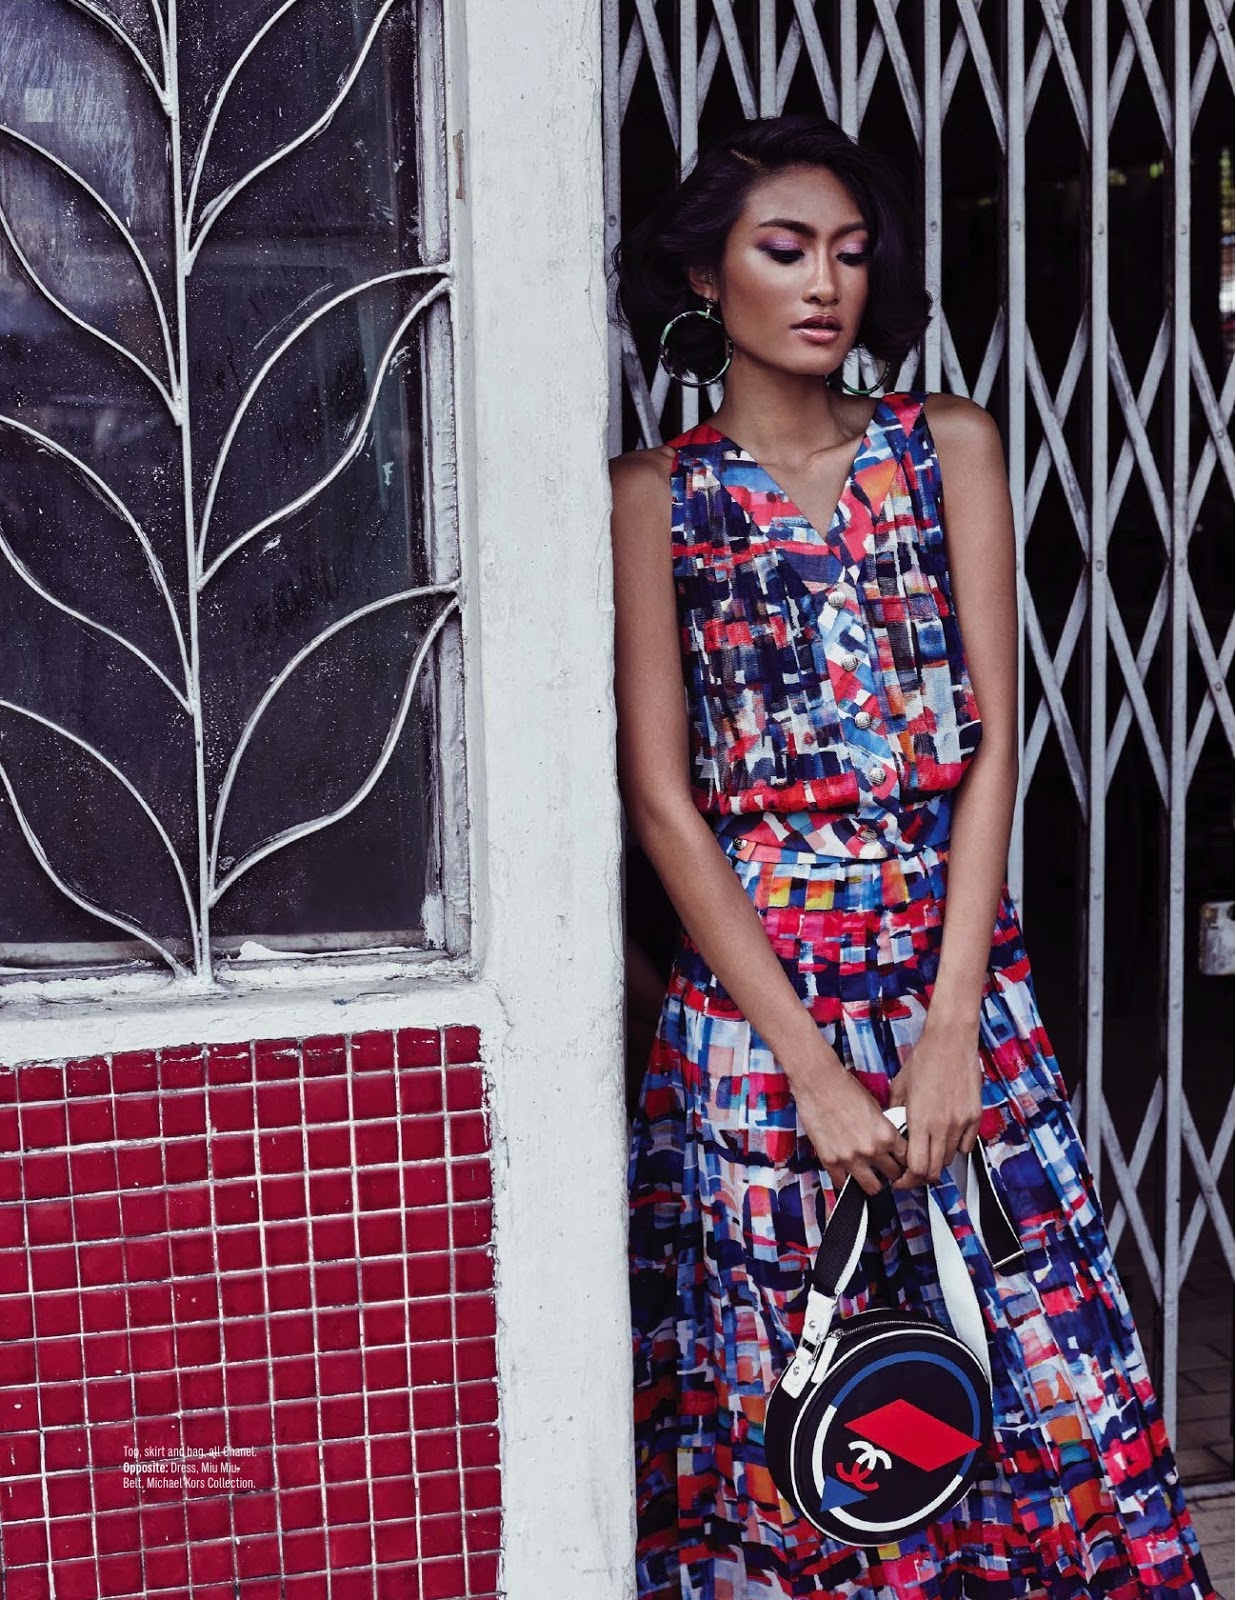 A day in the life of a Malaysian model in New York, as told by Atikah Karim